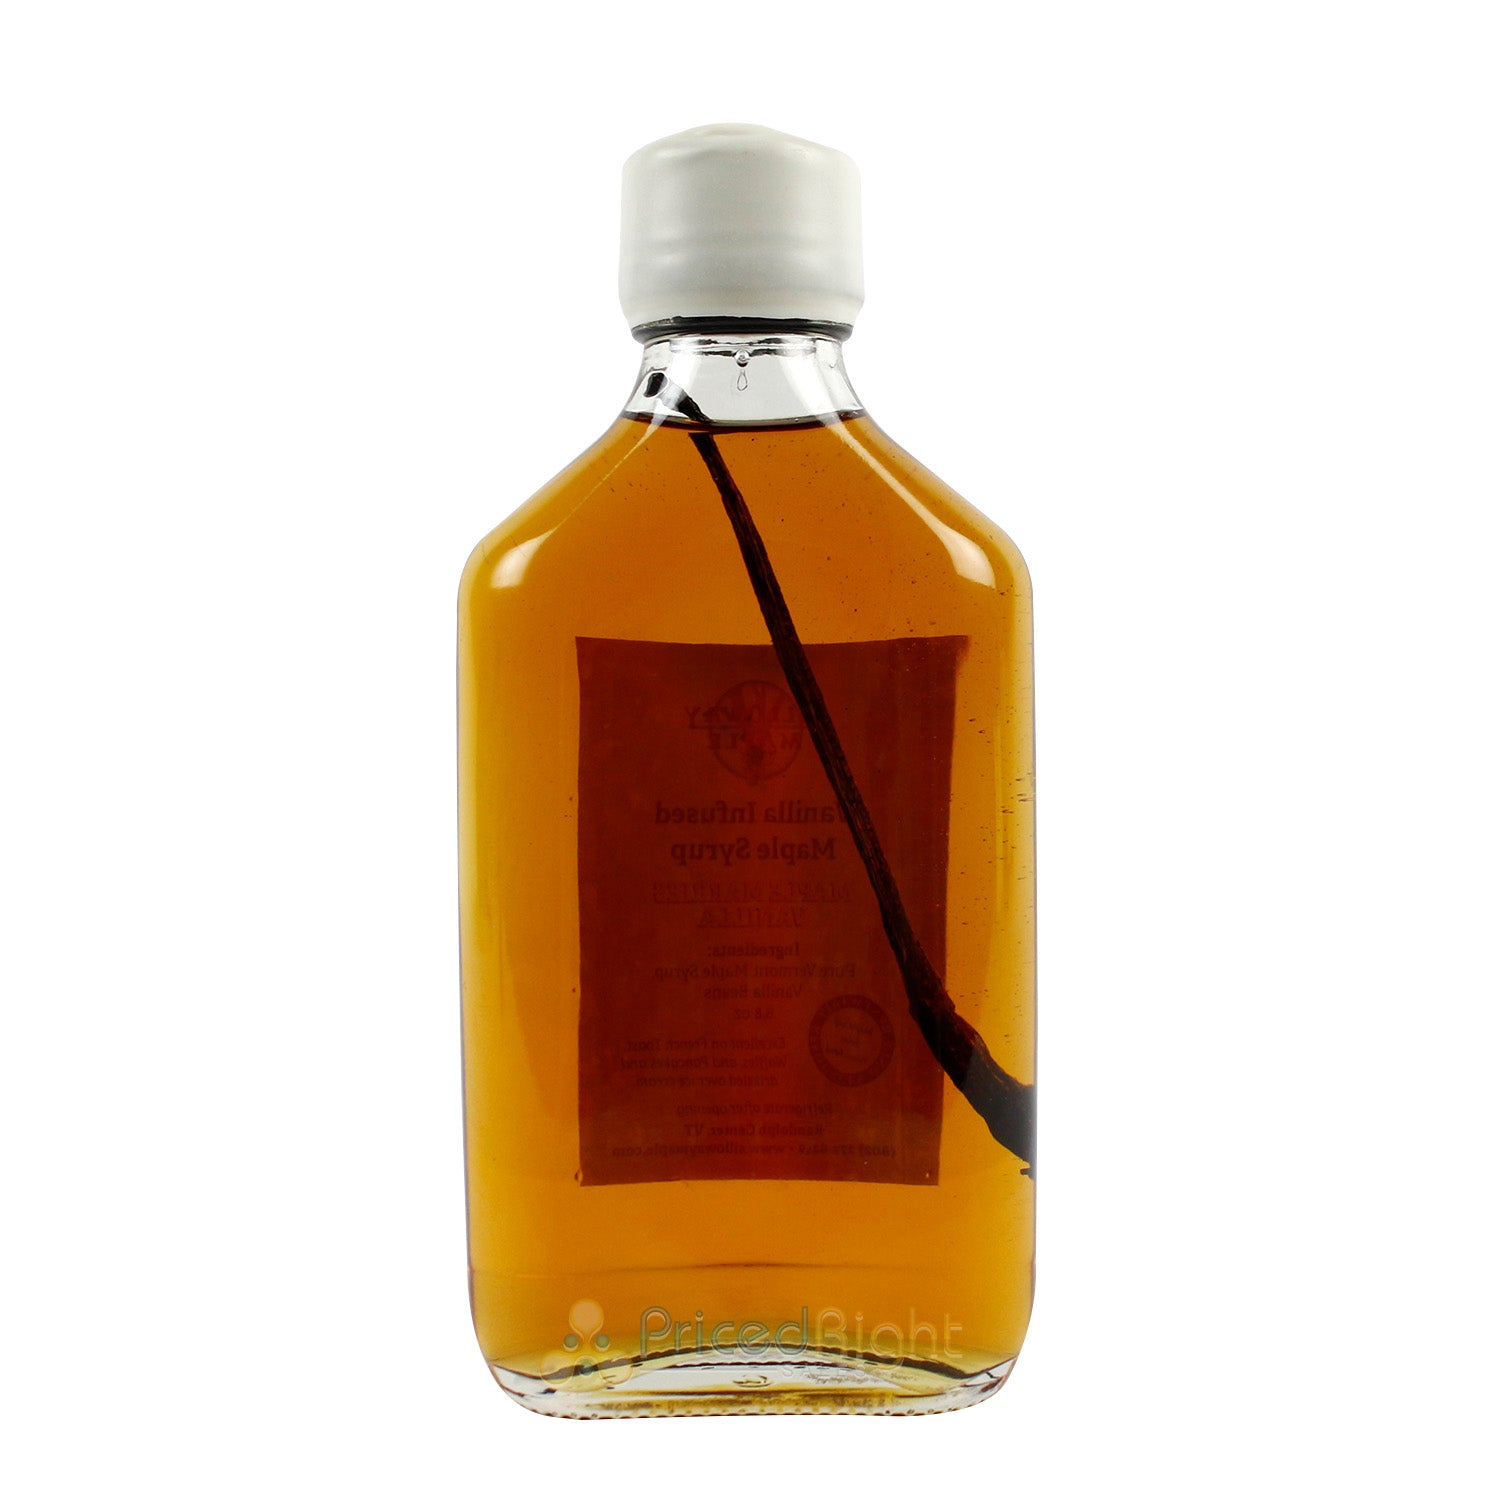 Silloway Maple Vanilla Infused Clean Energy Maple Syrup With Vanilla Bean 6.8 oz